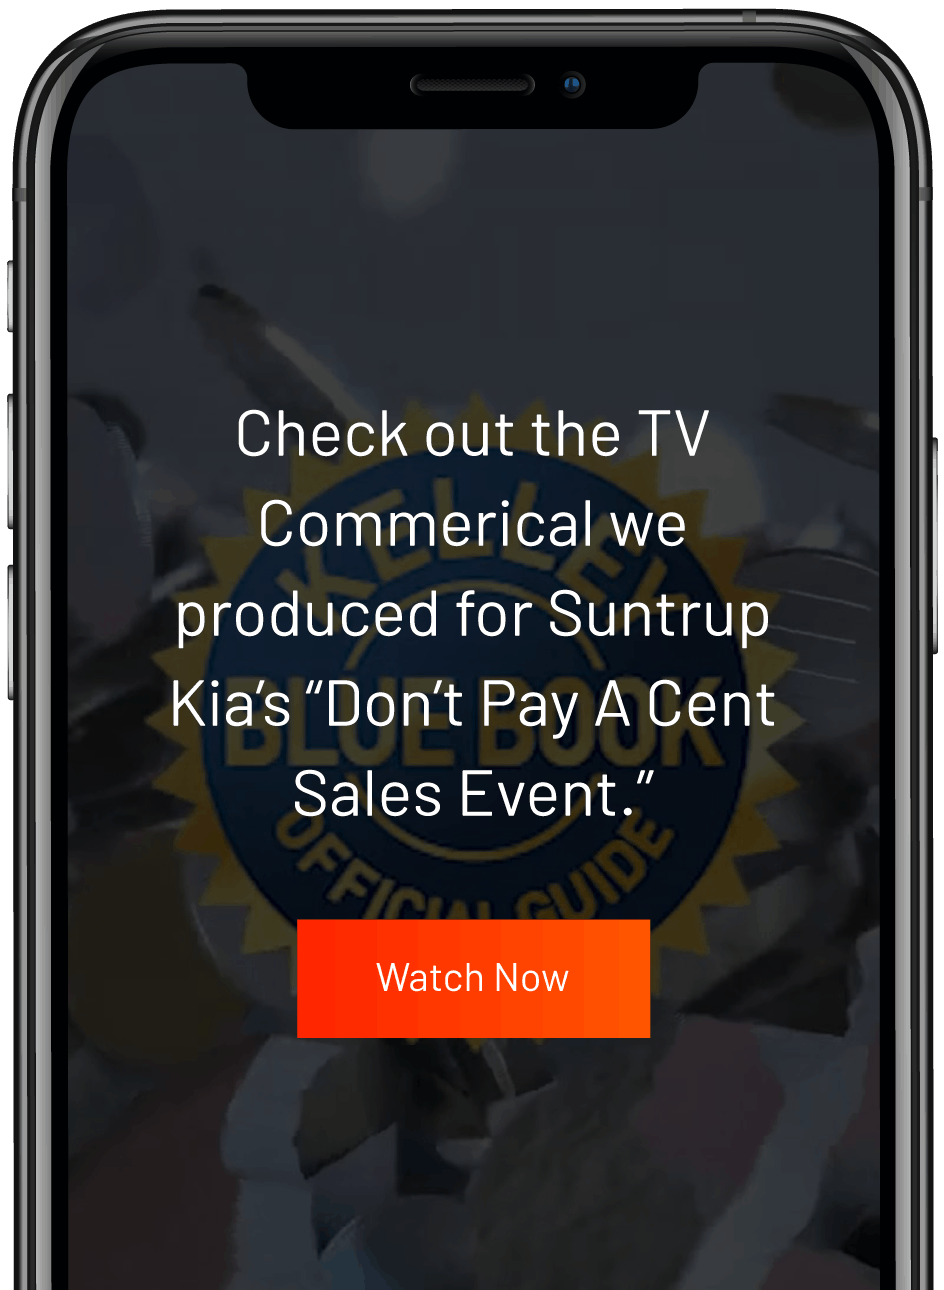 Suntrup-Kia's-Dont-pay-a-cent-sales-event-video-mocked-up-on-an-iphone